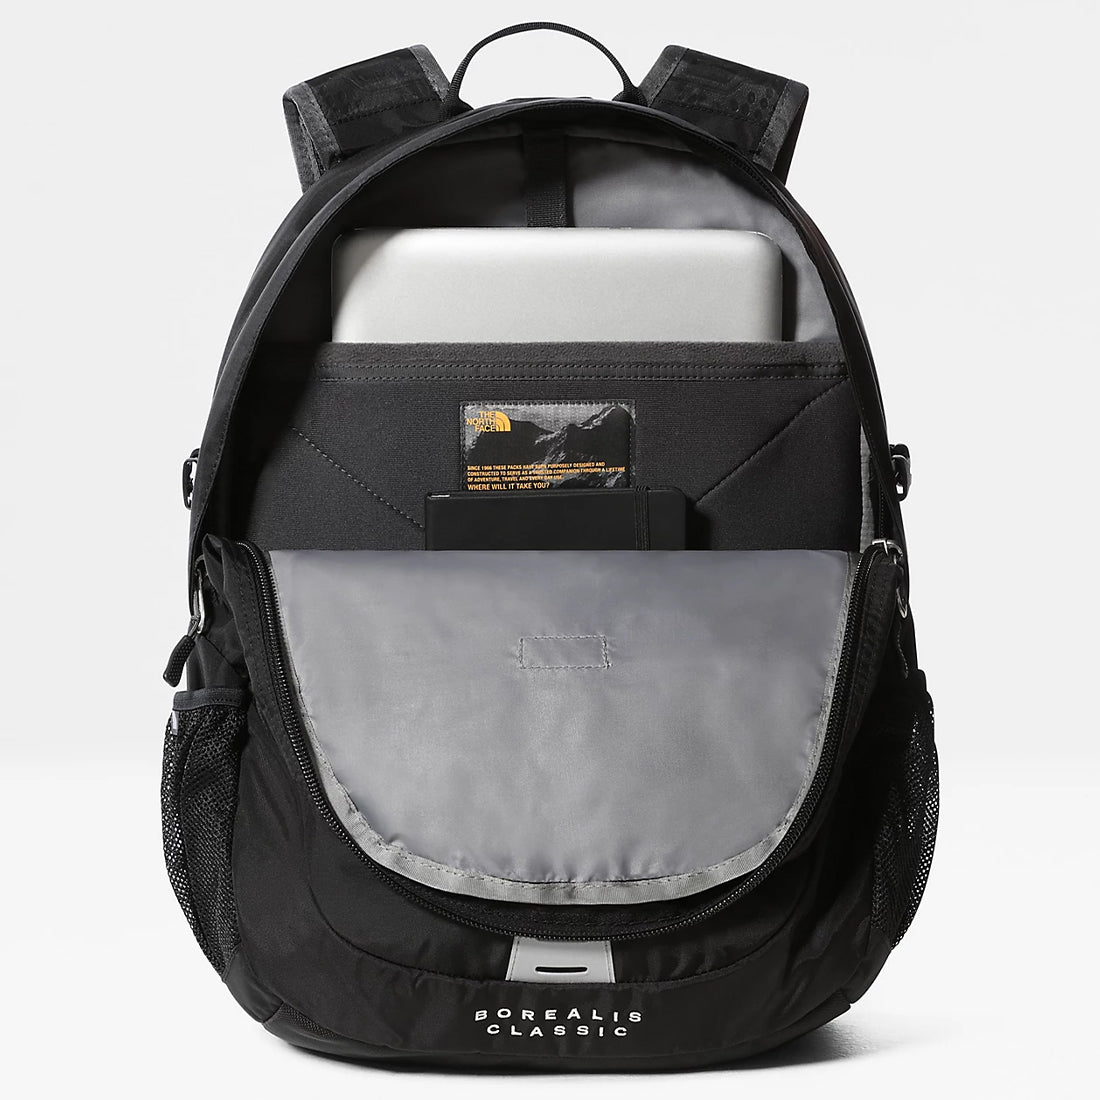 The north Face backpack - Borealis Classic - Black